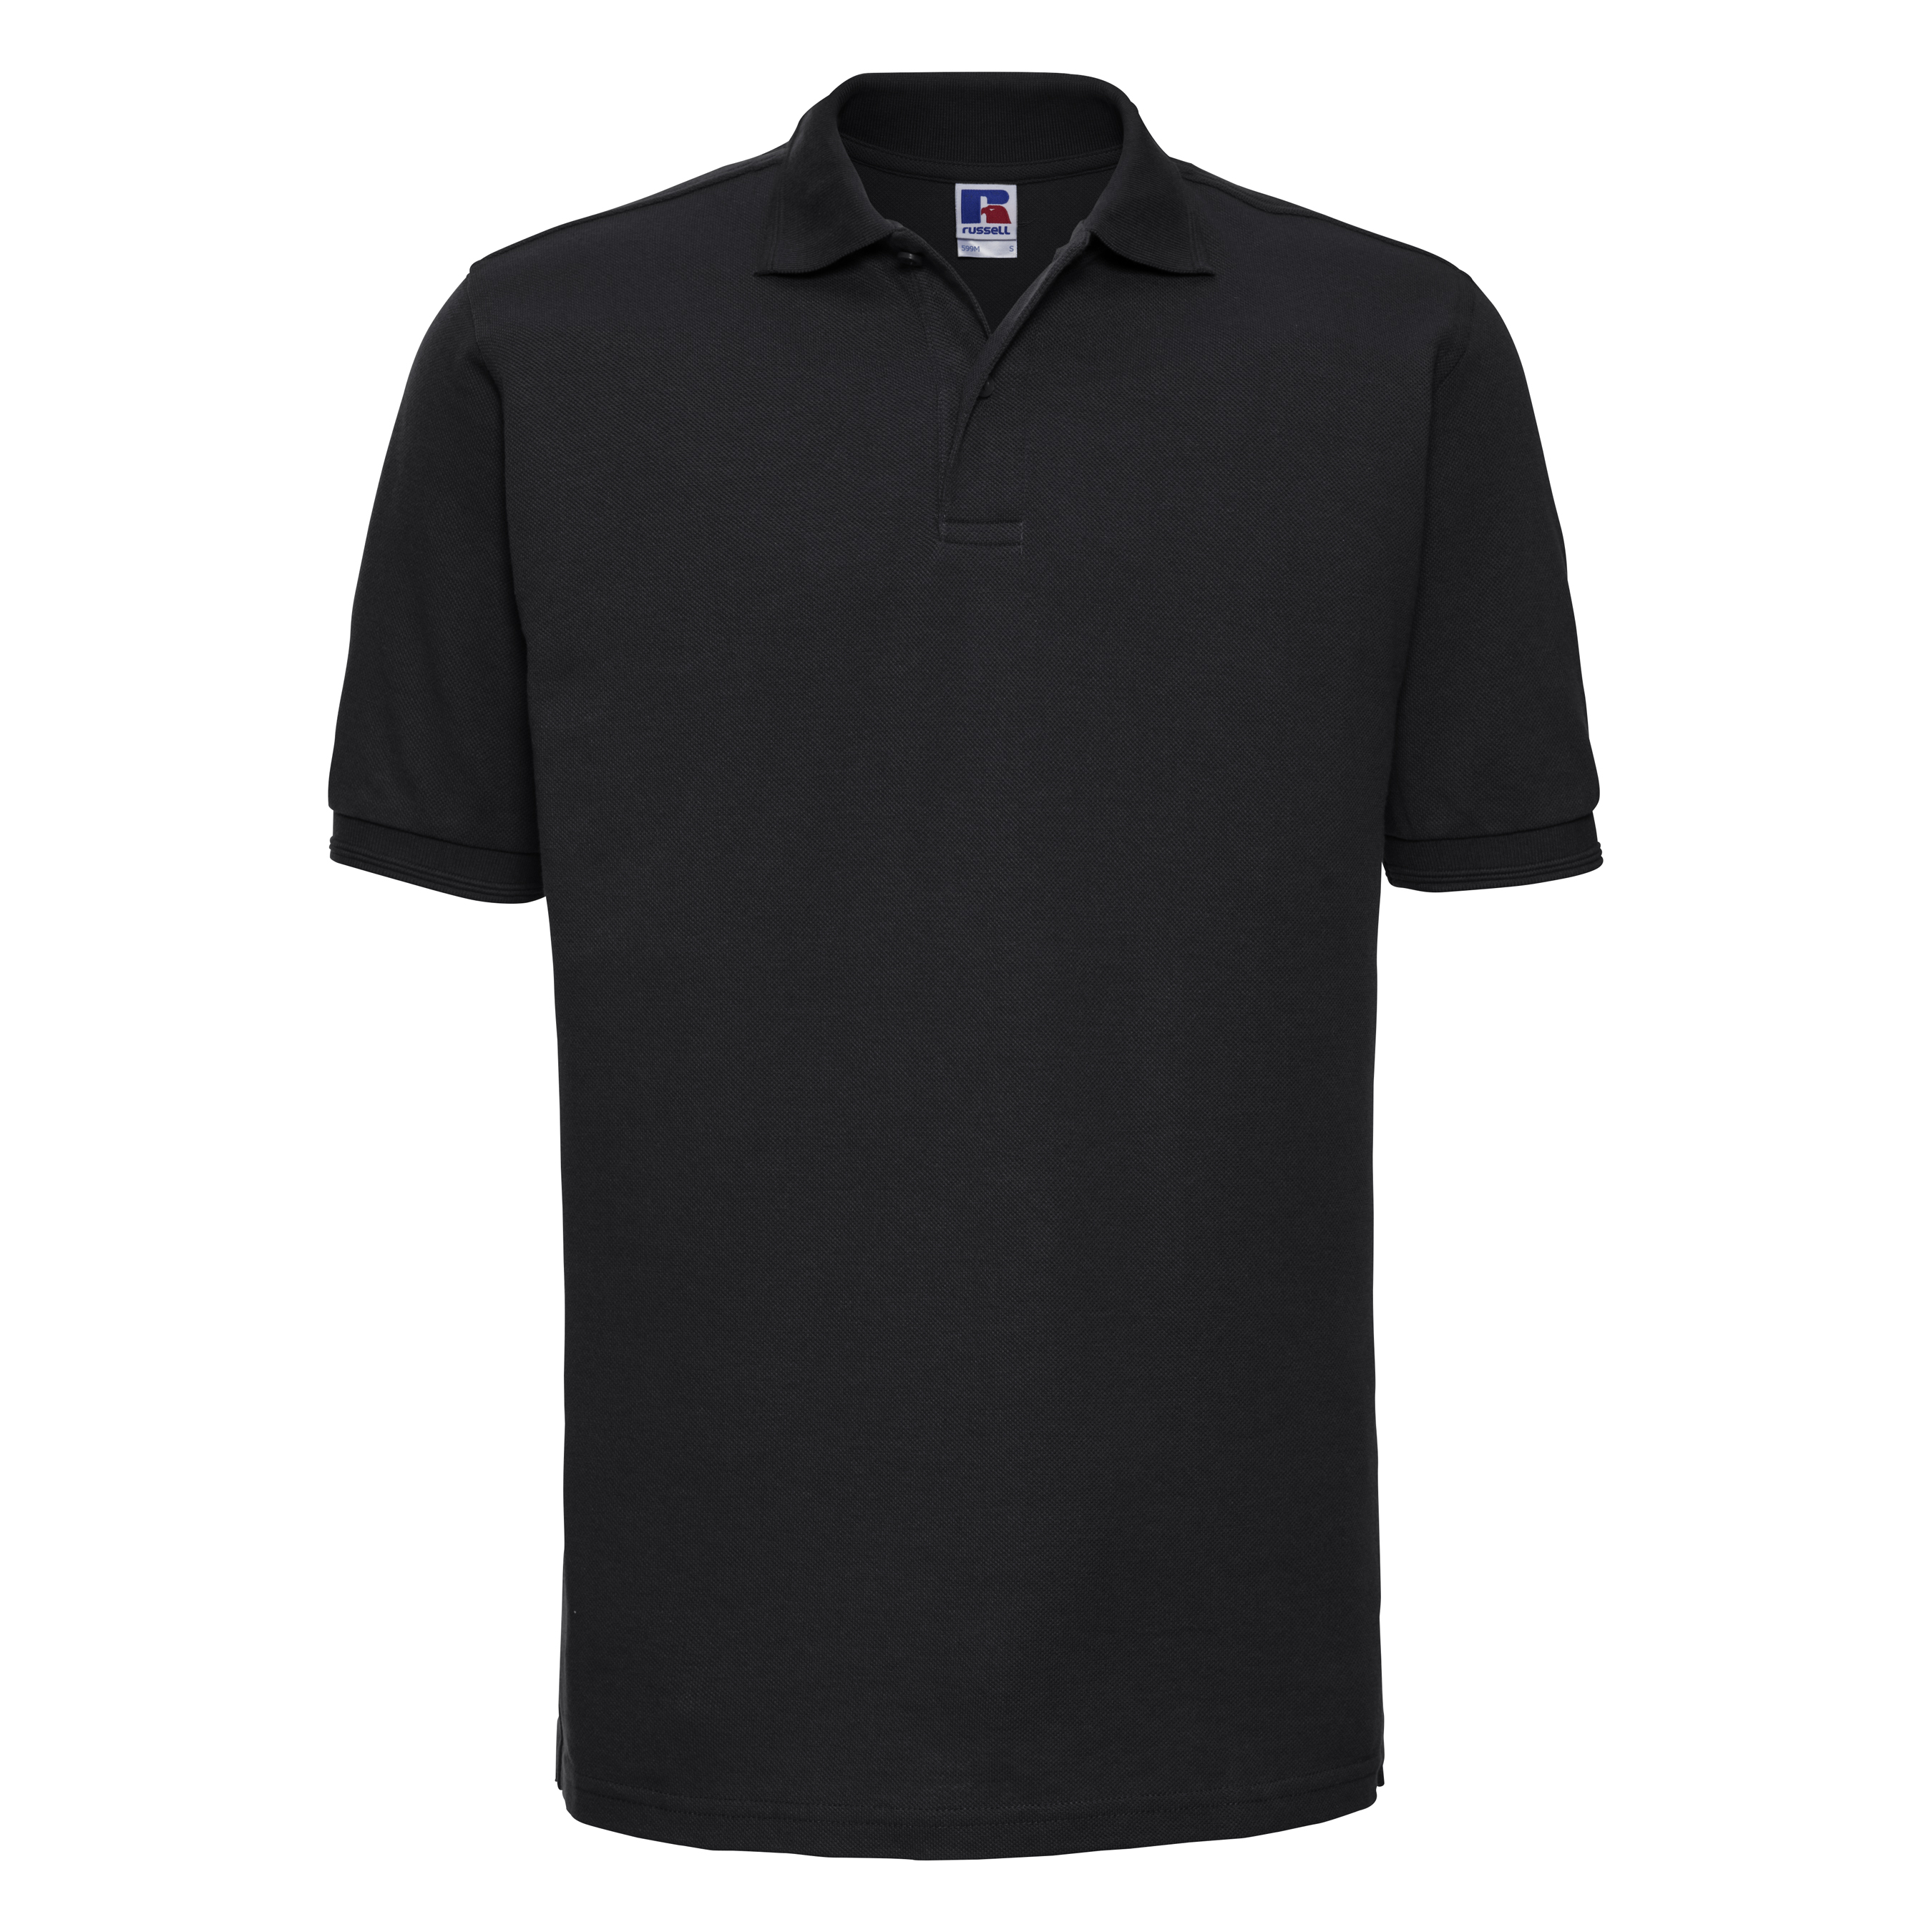 ax-httpswebsystems.s3.amazonaws.comtmp_for_downloadrussell-hardwearing-wash-polo-black.jpg